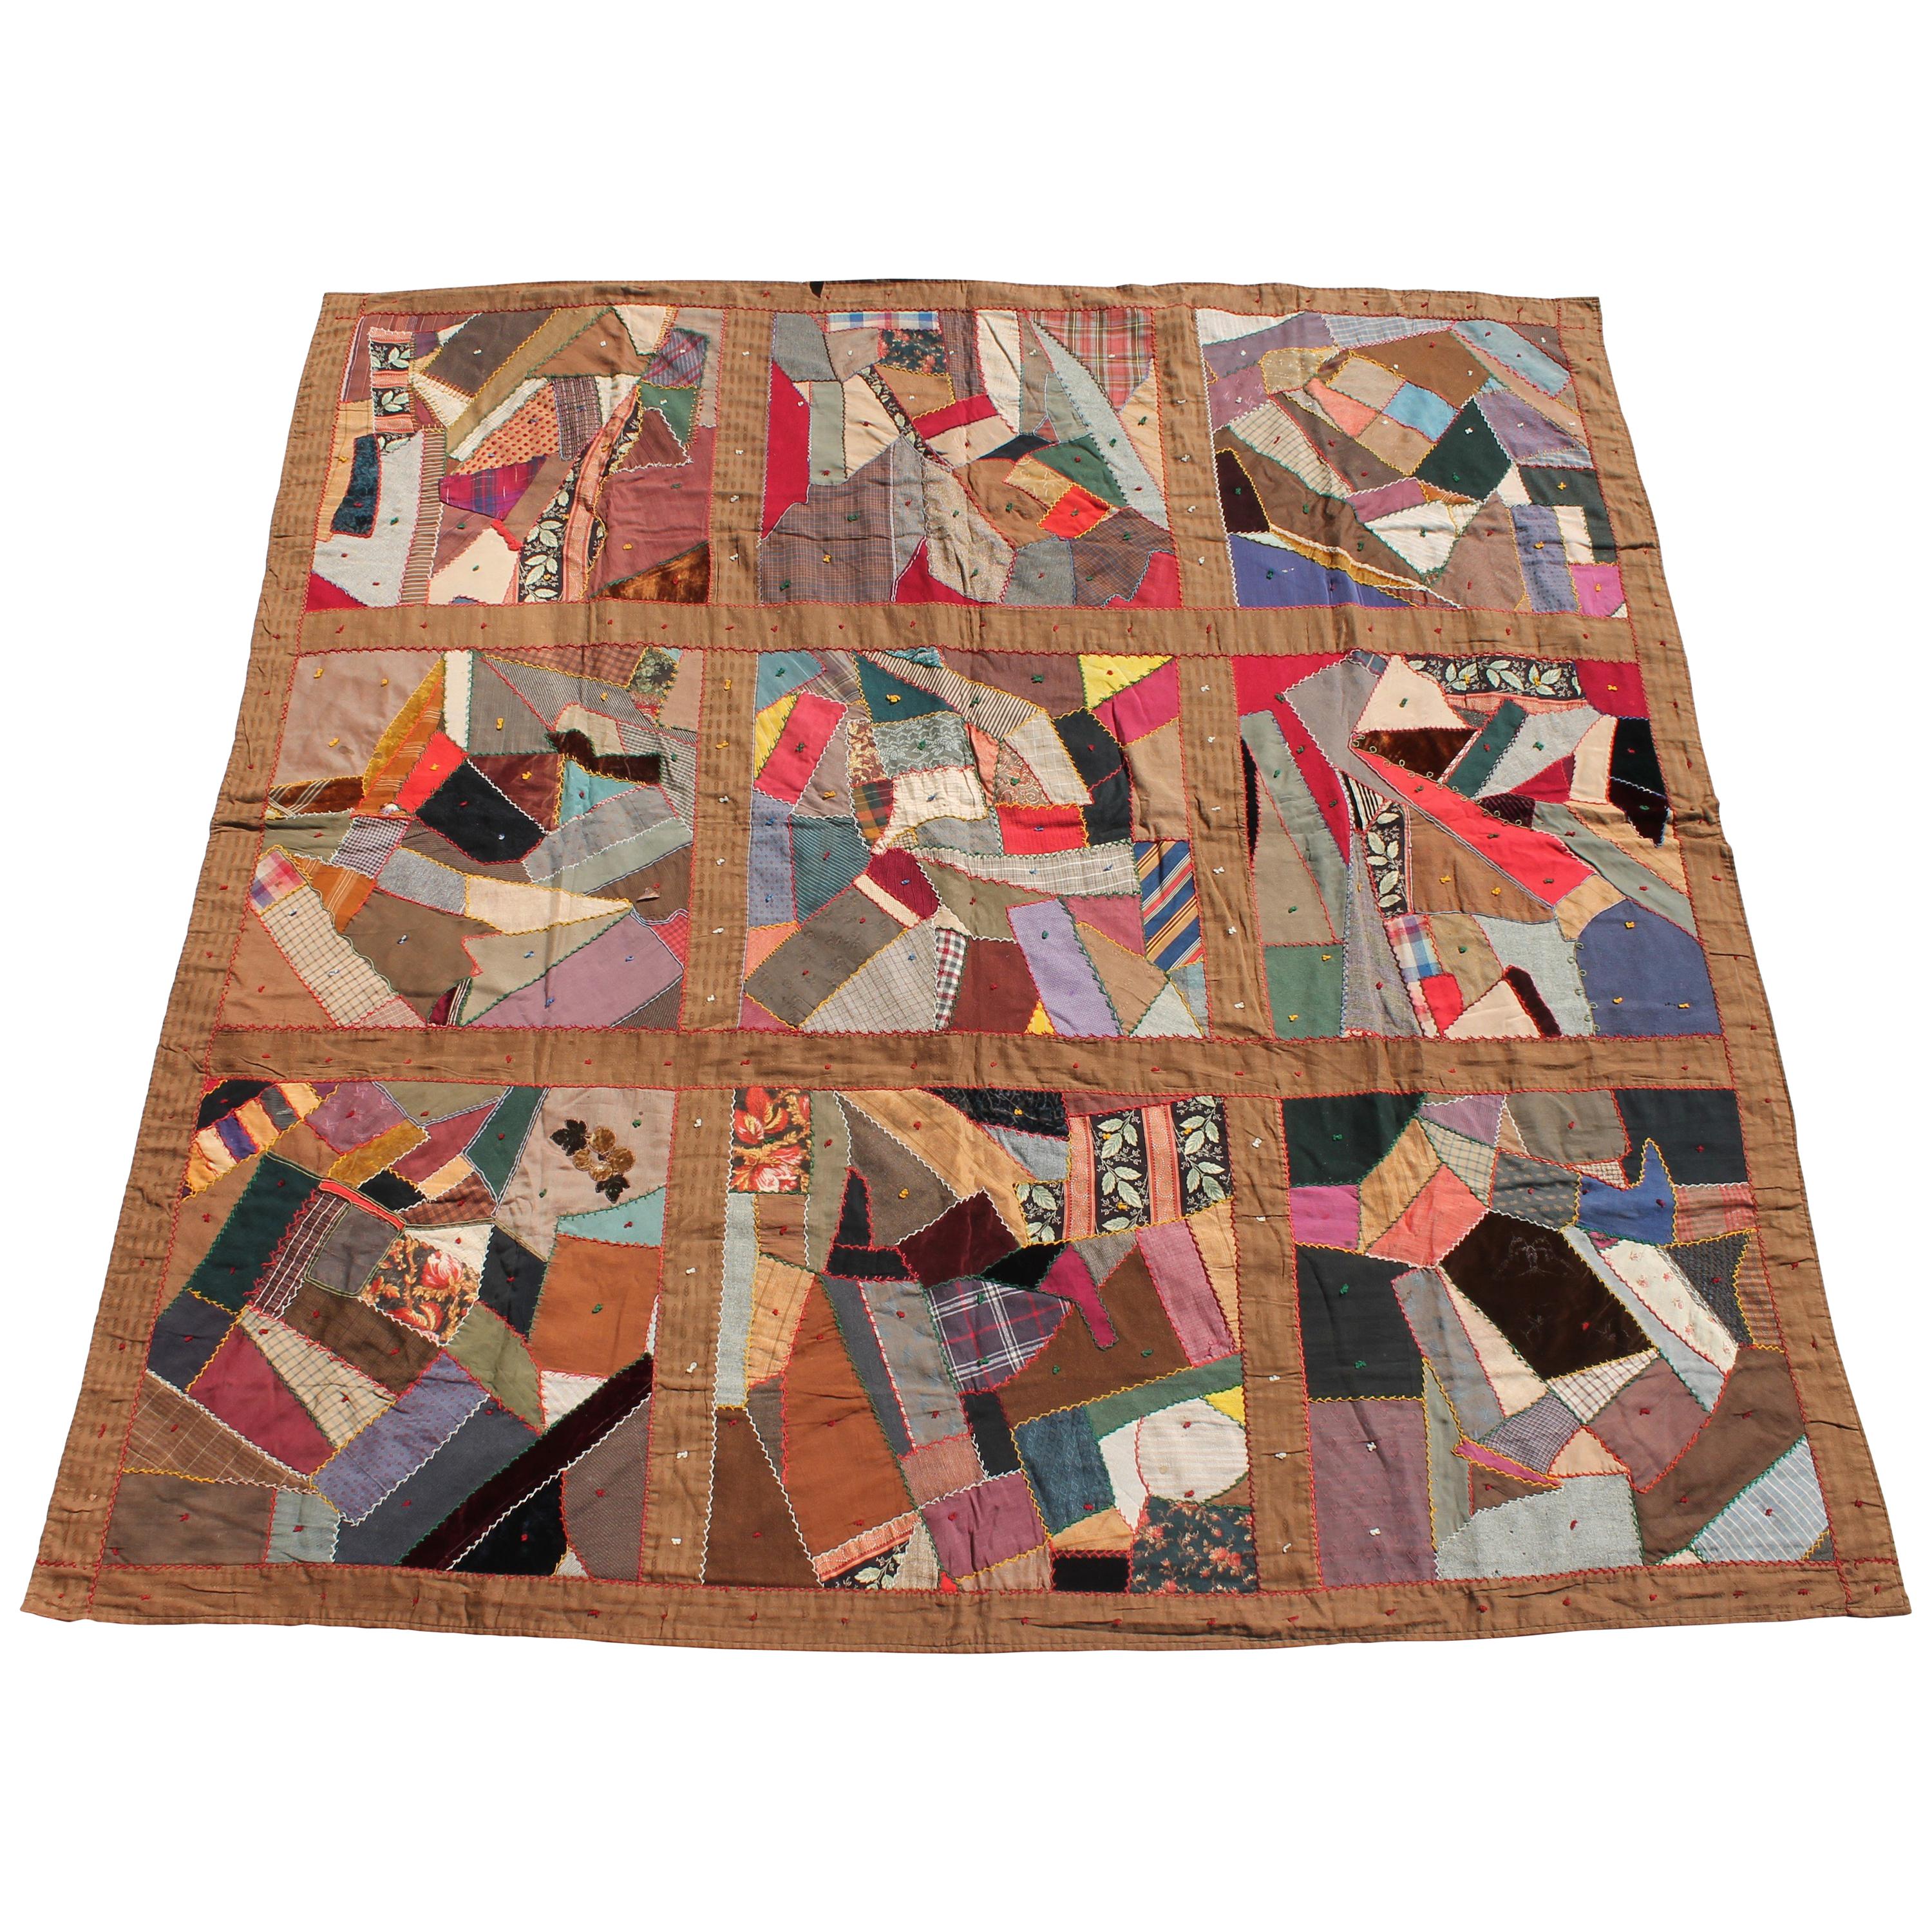 Antique Quilt, Contained 19th Century Crazy Quilt from Pennsylvania